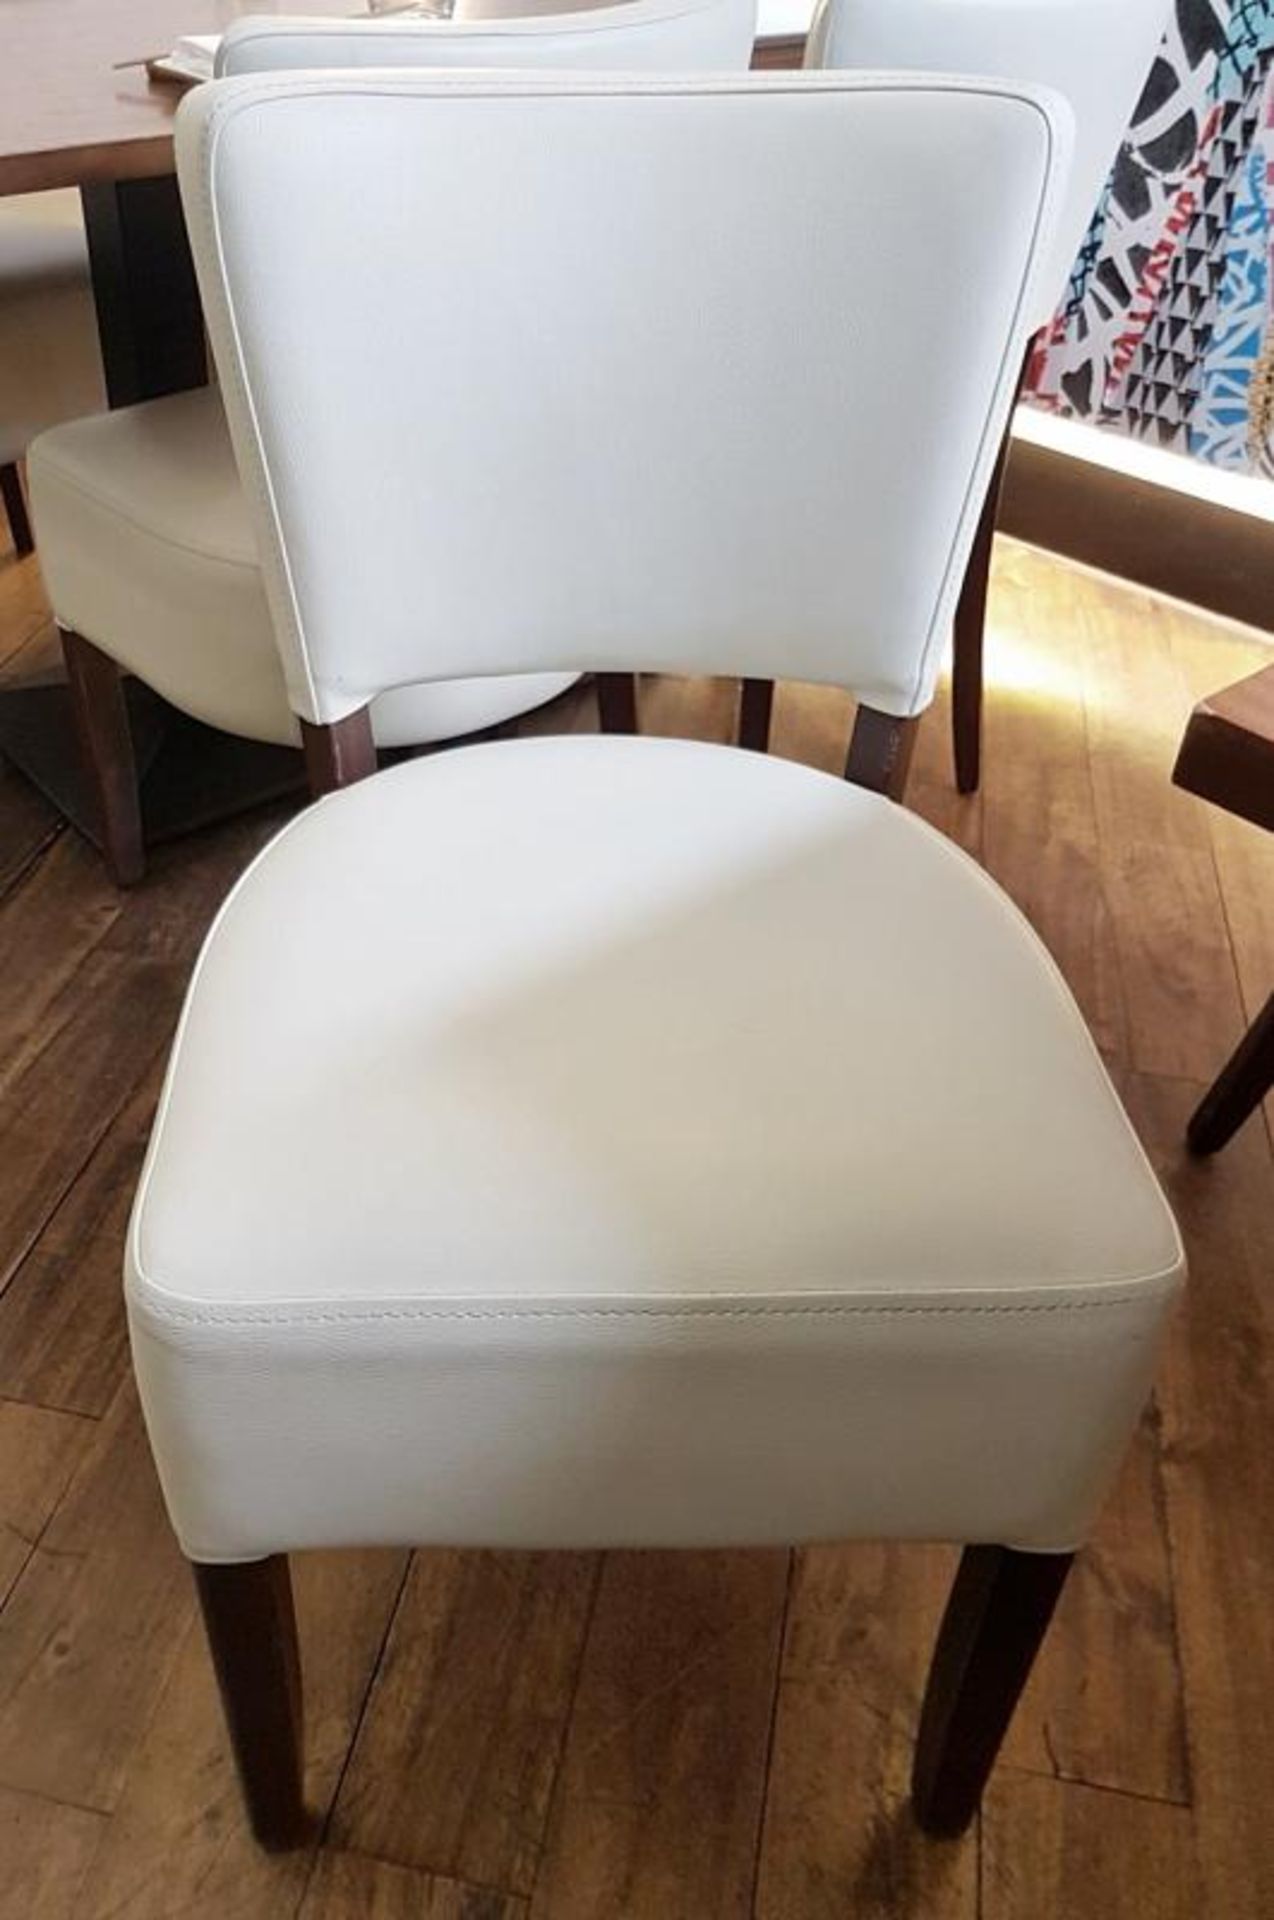 6 x Upholstered Restaurant Bar Chairs - Covered In A Light Cream Faux Leather - Image 2 of 7